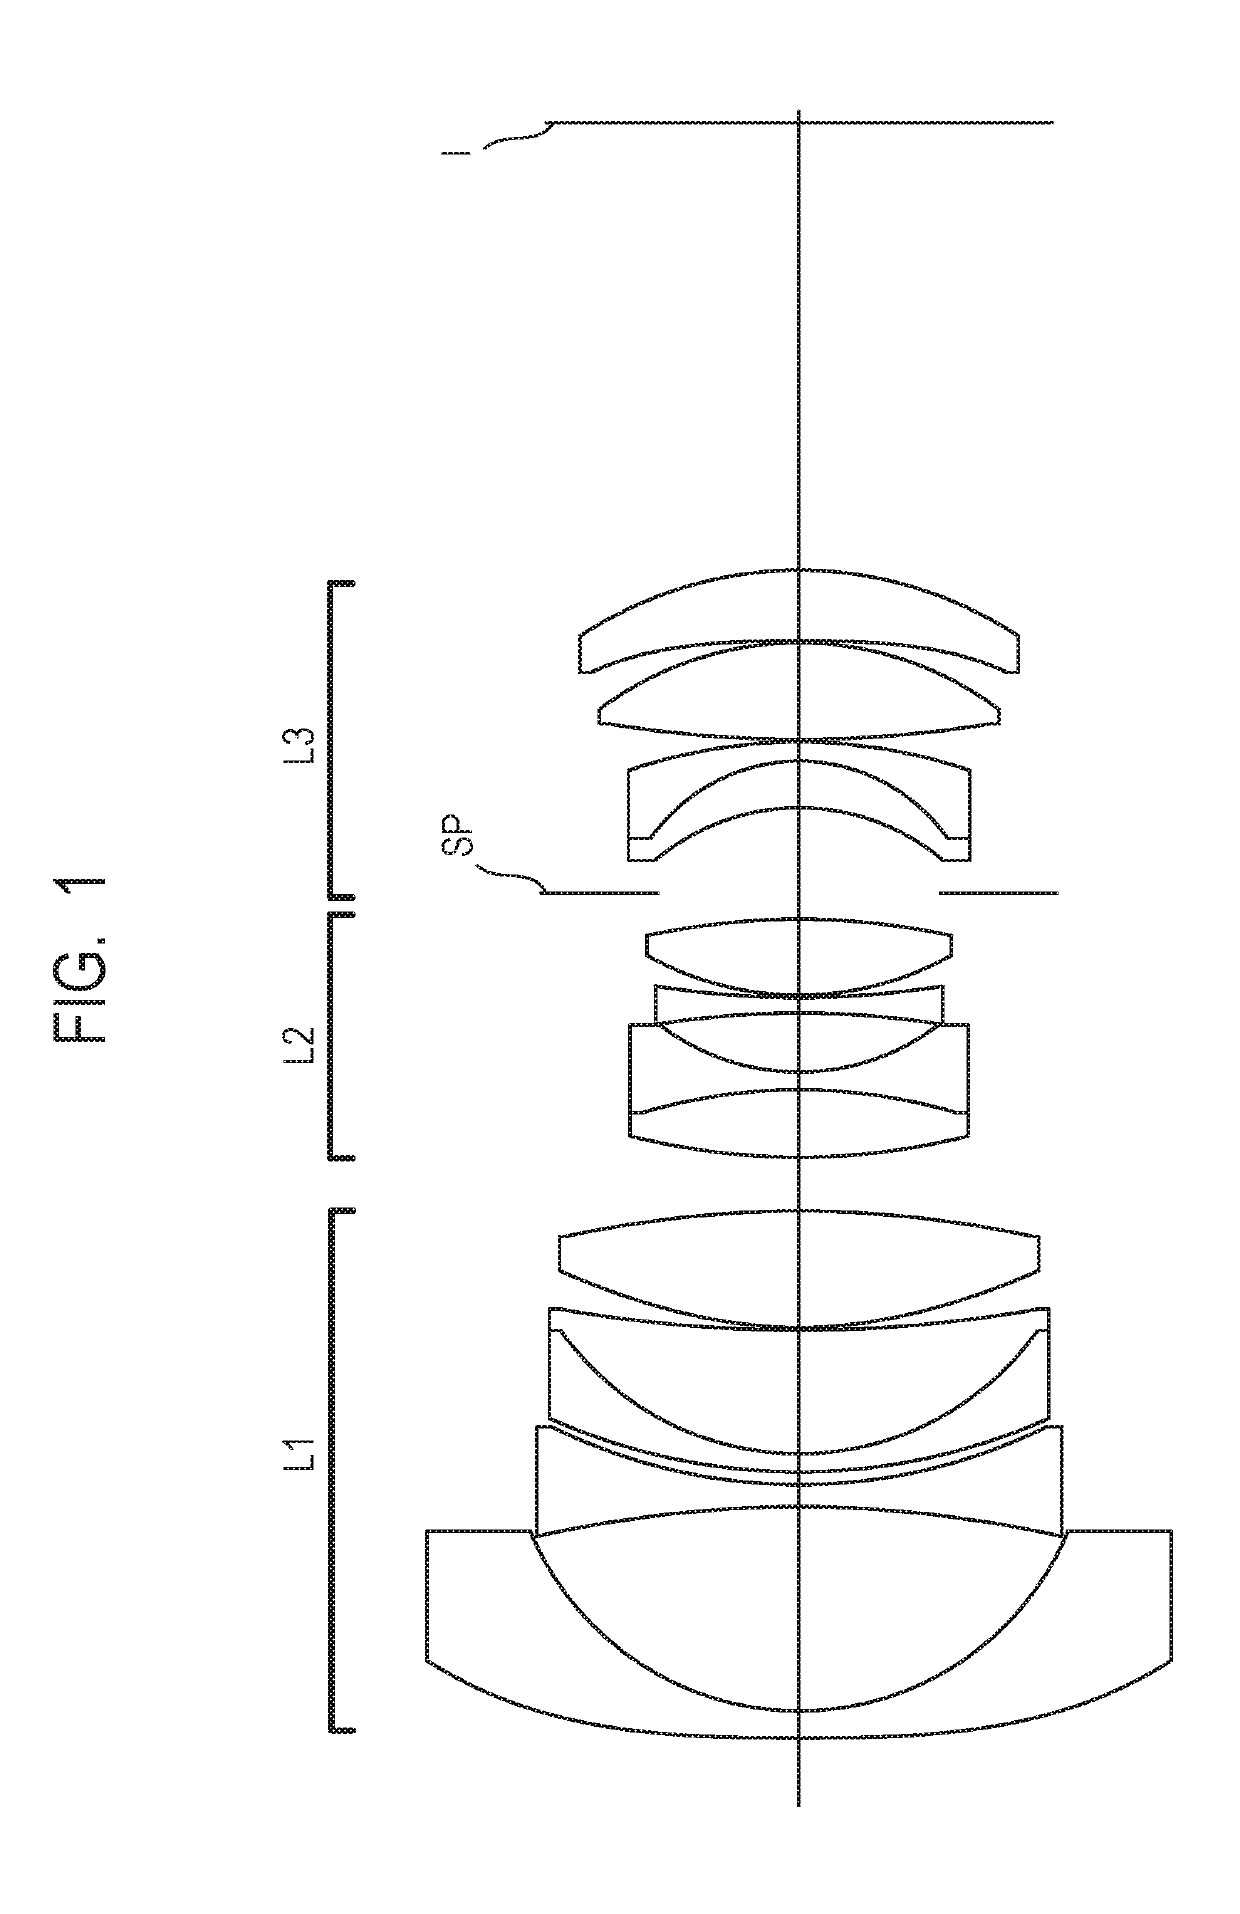 Fixed focal length lens and image pickup apparatus